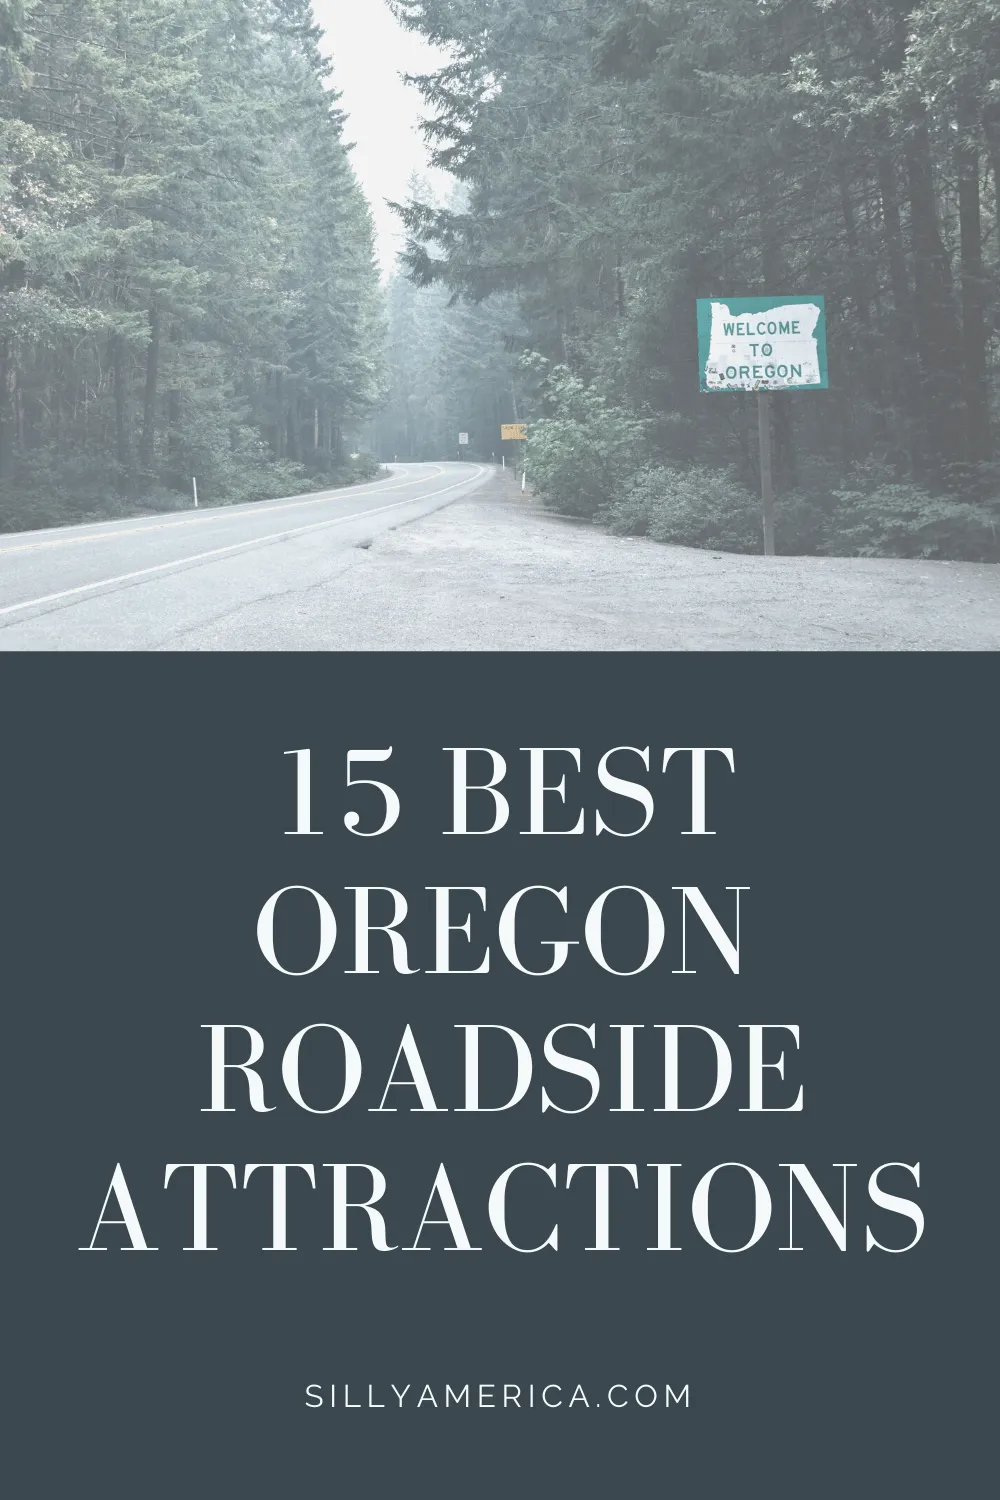 The best Oregon roadside attractions to visit on an Oregon road trip. Add these roadside oddities to your travel bucket list, route map, or itinerary! #OregonRoadsideAttractions #OregonRoadsideAttraction #RoadsideAttractions #RoadsideAttraction #RoadTrip #OregonRoadTrip #OregonRoadTripMap #OregonRoadTripItinerary #ThingsToDoInOregon #PlacesToVisitInOregon #OregonCampingRoadTrip #OregonTravelGuide #OregonRoadTripBucketLists #OregonBucketList #WeirdRoadsideAttractions